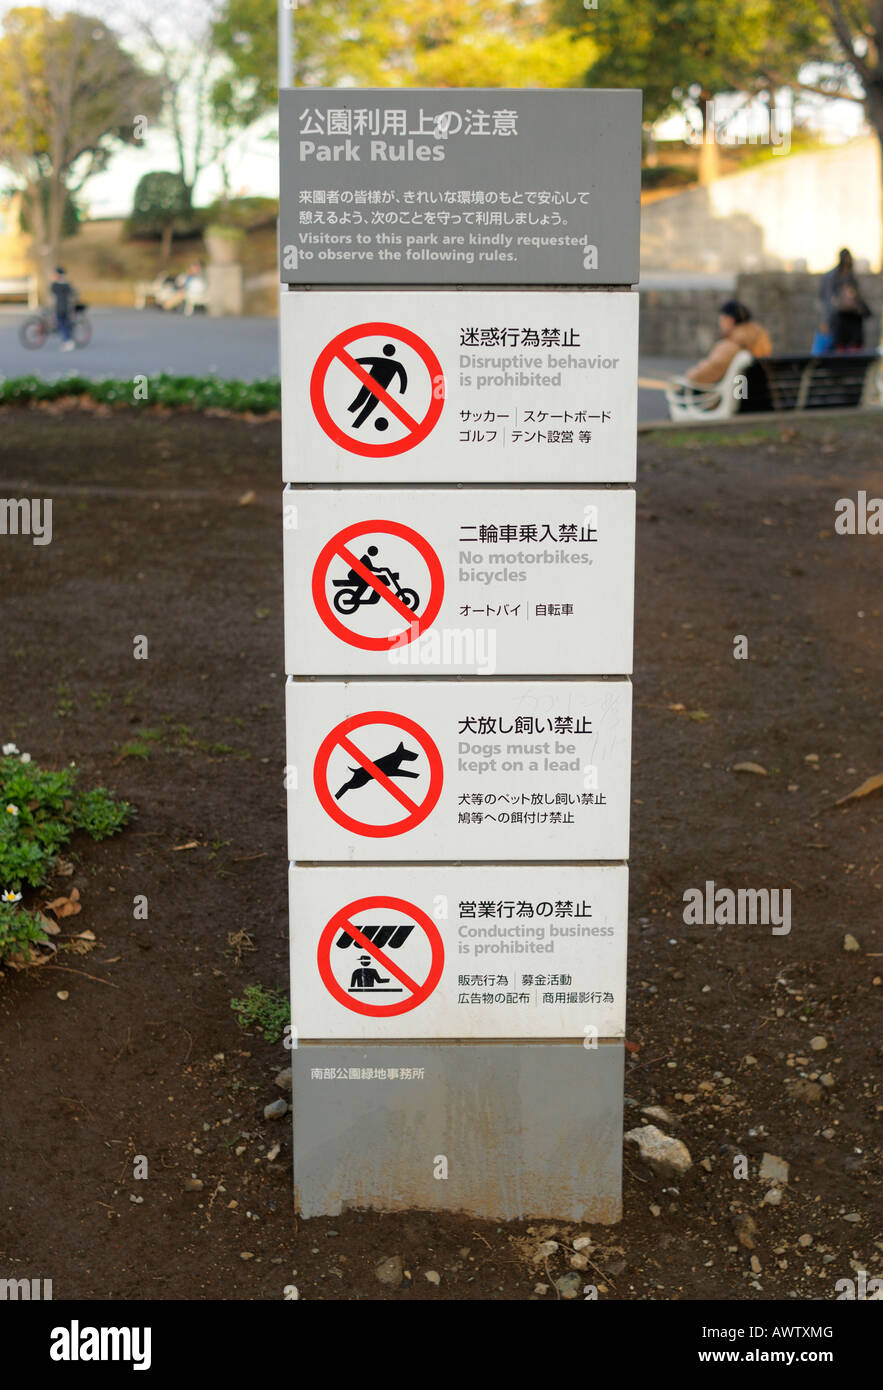 Park Rules - Visitors to this park are kindly requested to observe the following rules, Yamahita Park Yokohama JP Stock Photo